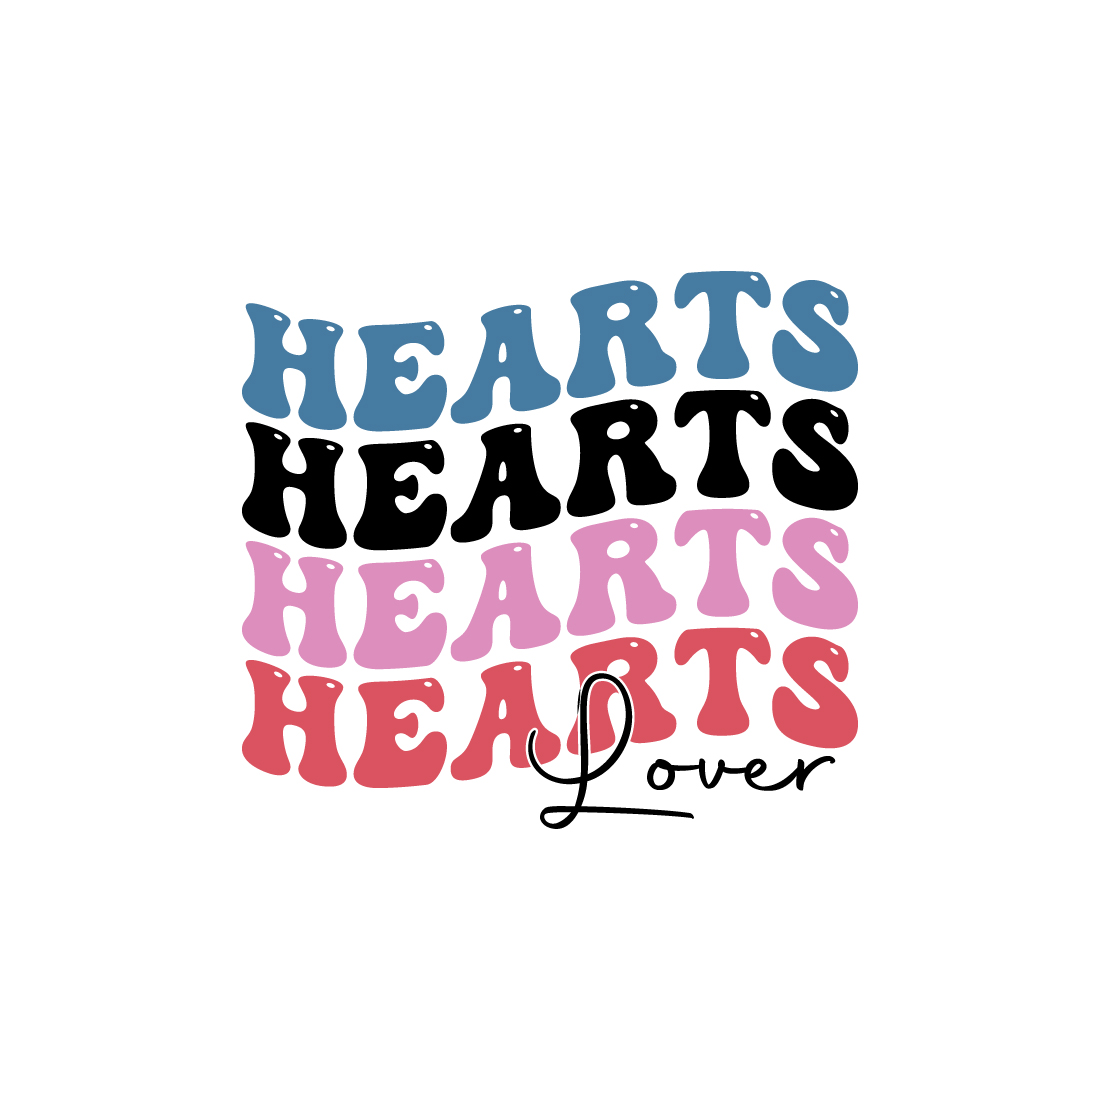 Hearts lover indoor game retro typography design for t-shirts, cards, frame artwork, phone cases, bags, mugs, stickers, tumblers, print, etc preview image.